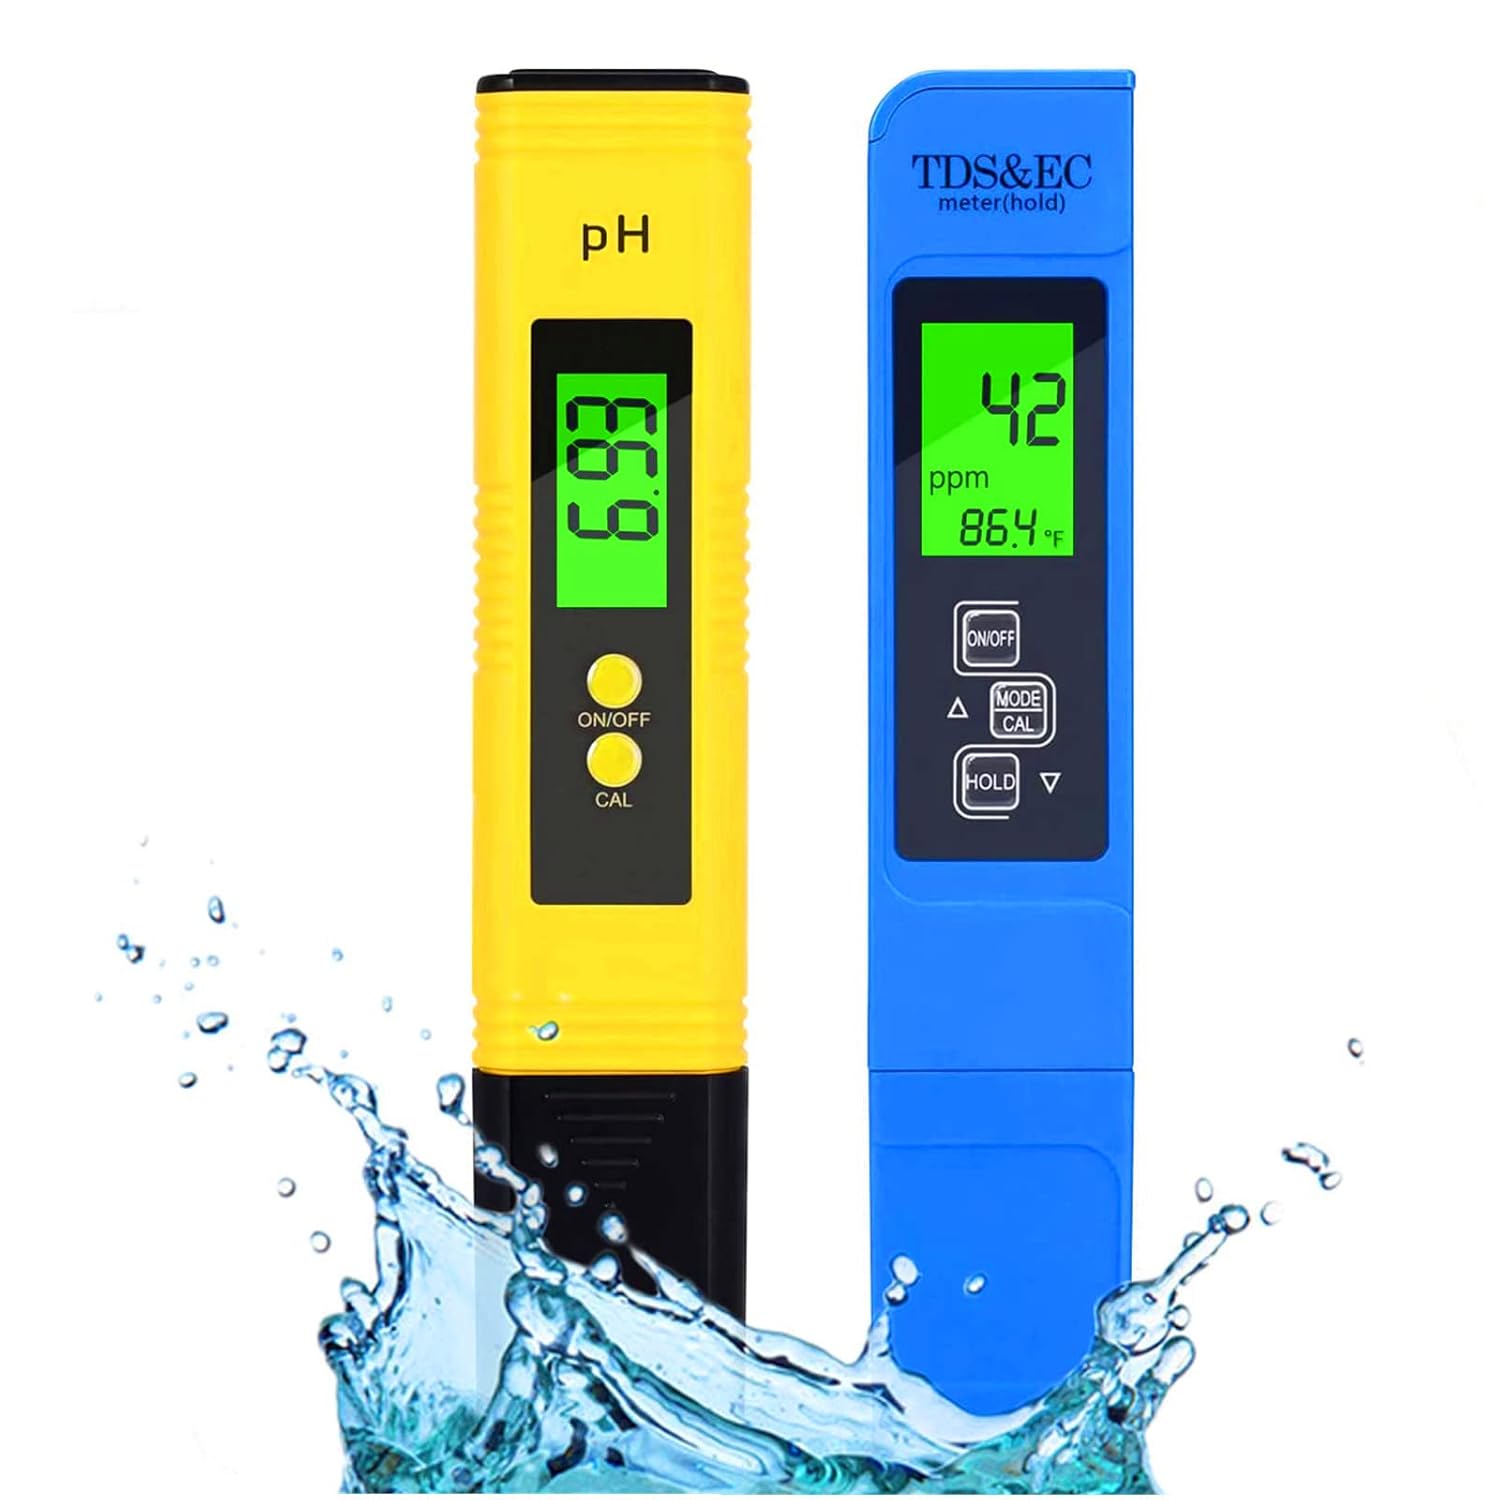 PH Meter TDS Meter Kit, Water pH Meter and 3 in 1 TDSEC Water Tester Combo, ±0.01 pH Accuracy ±2% F.S Accuracy TDS/EC/Temperature Meter,for Hydroponics, Household Drinking, Aquarium